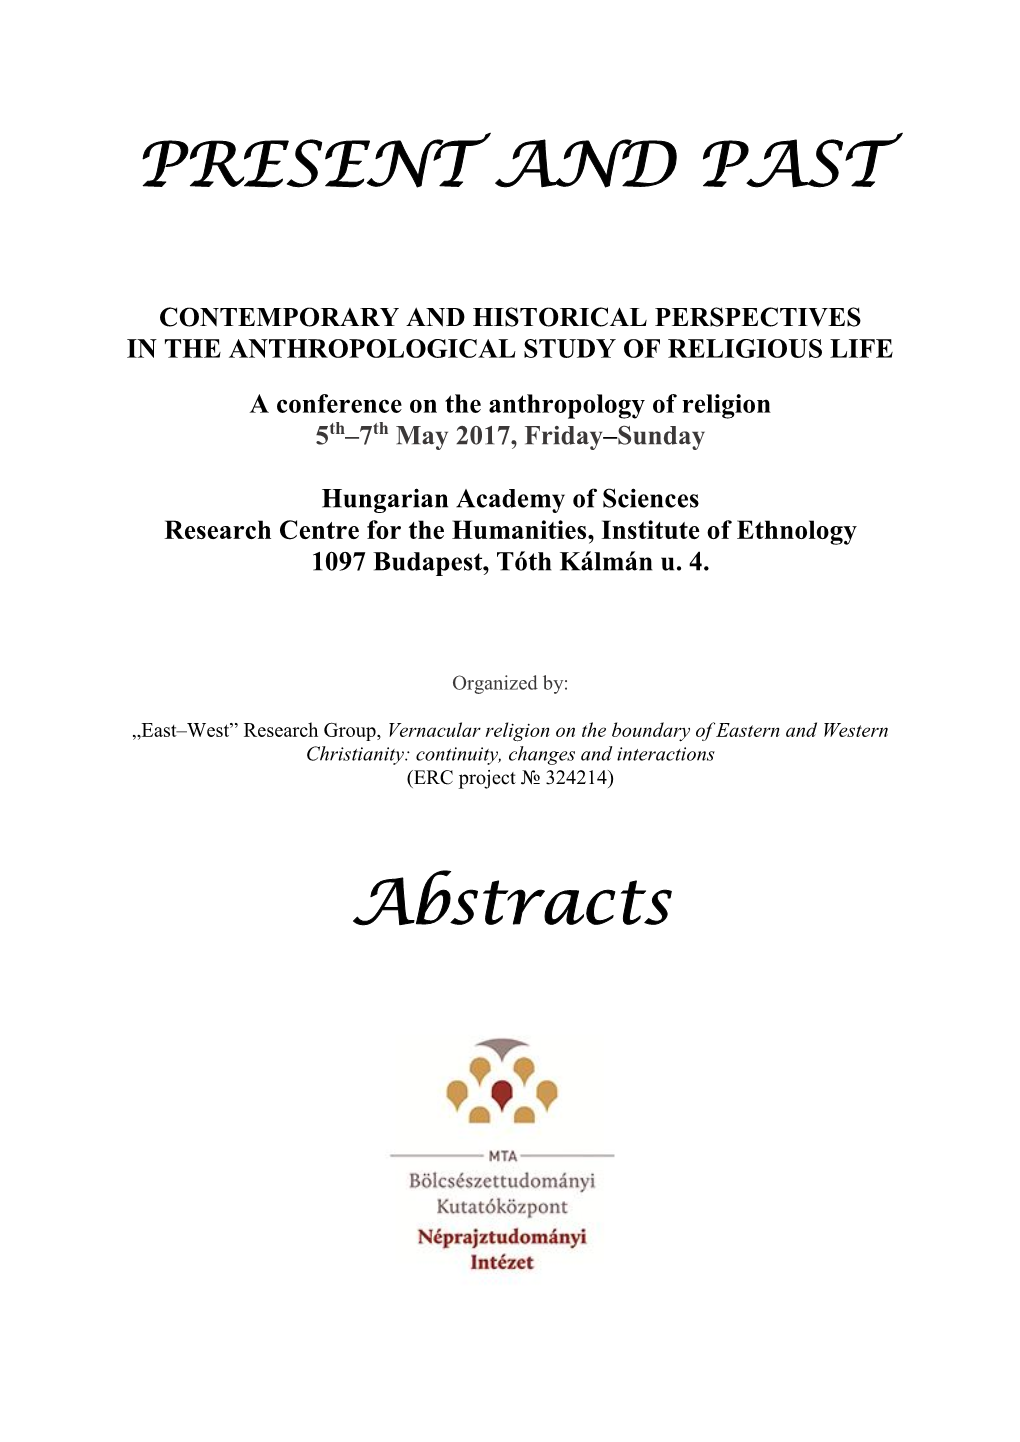 PRESENT and PAST Abstracts